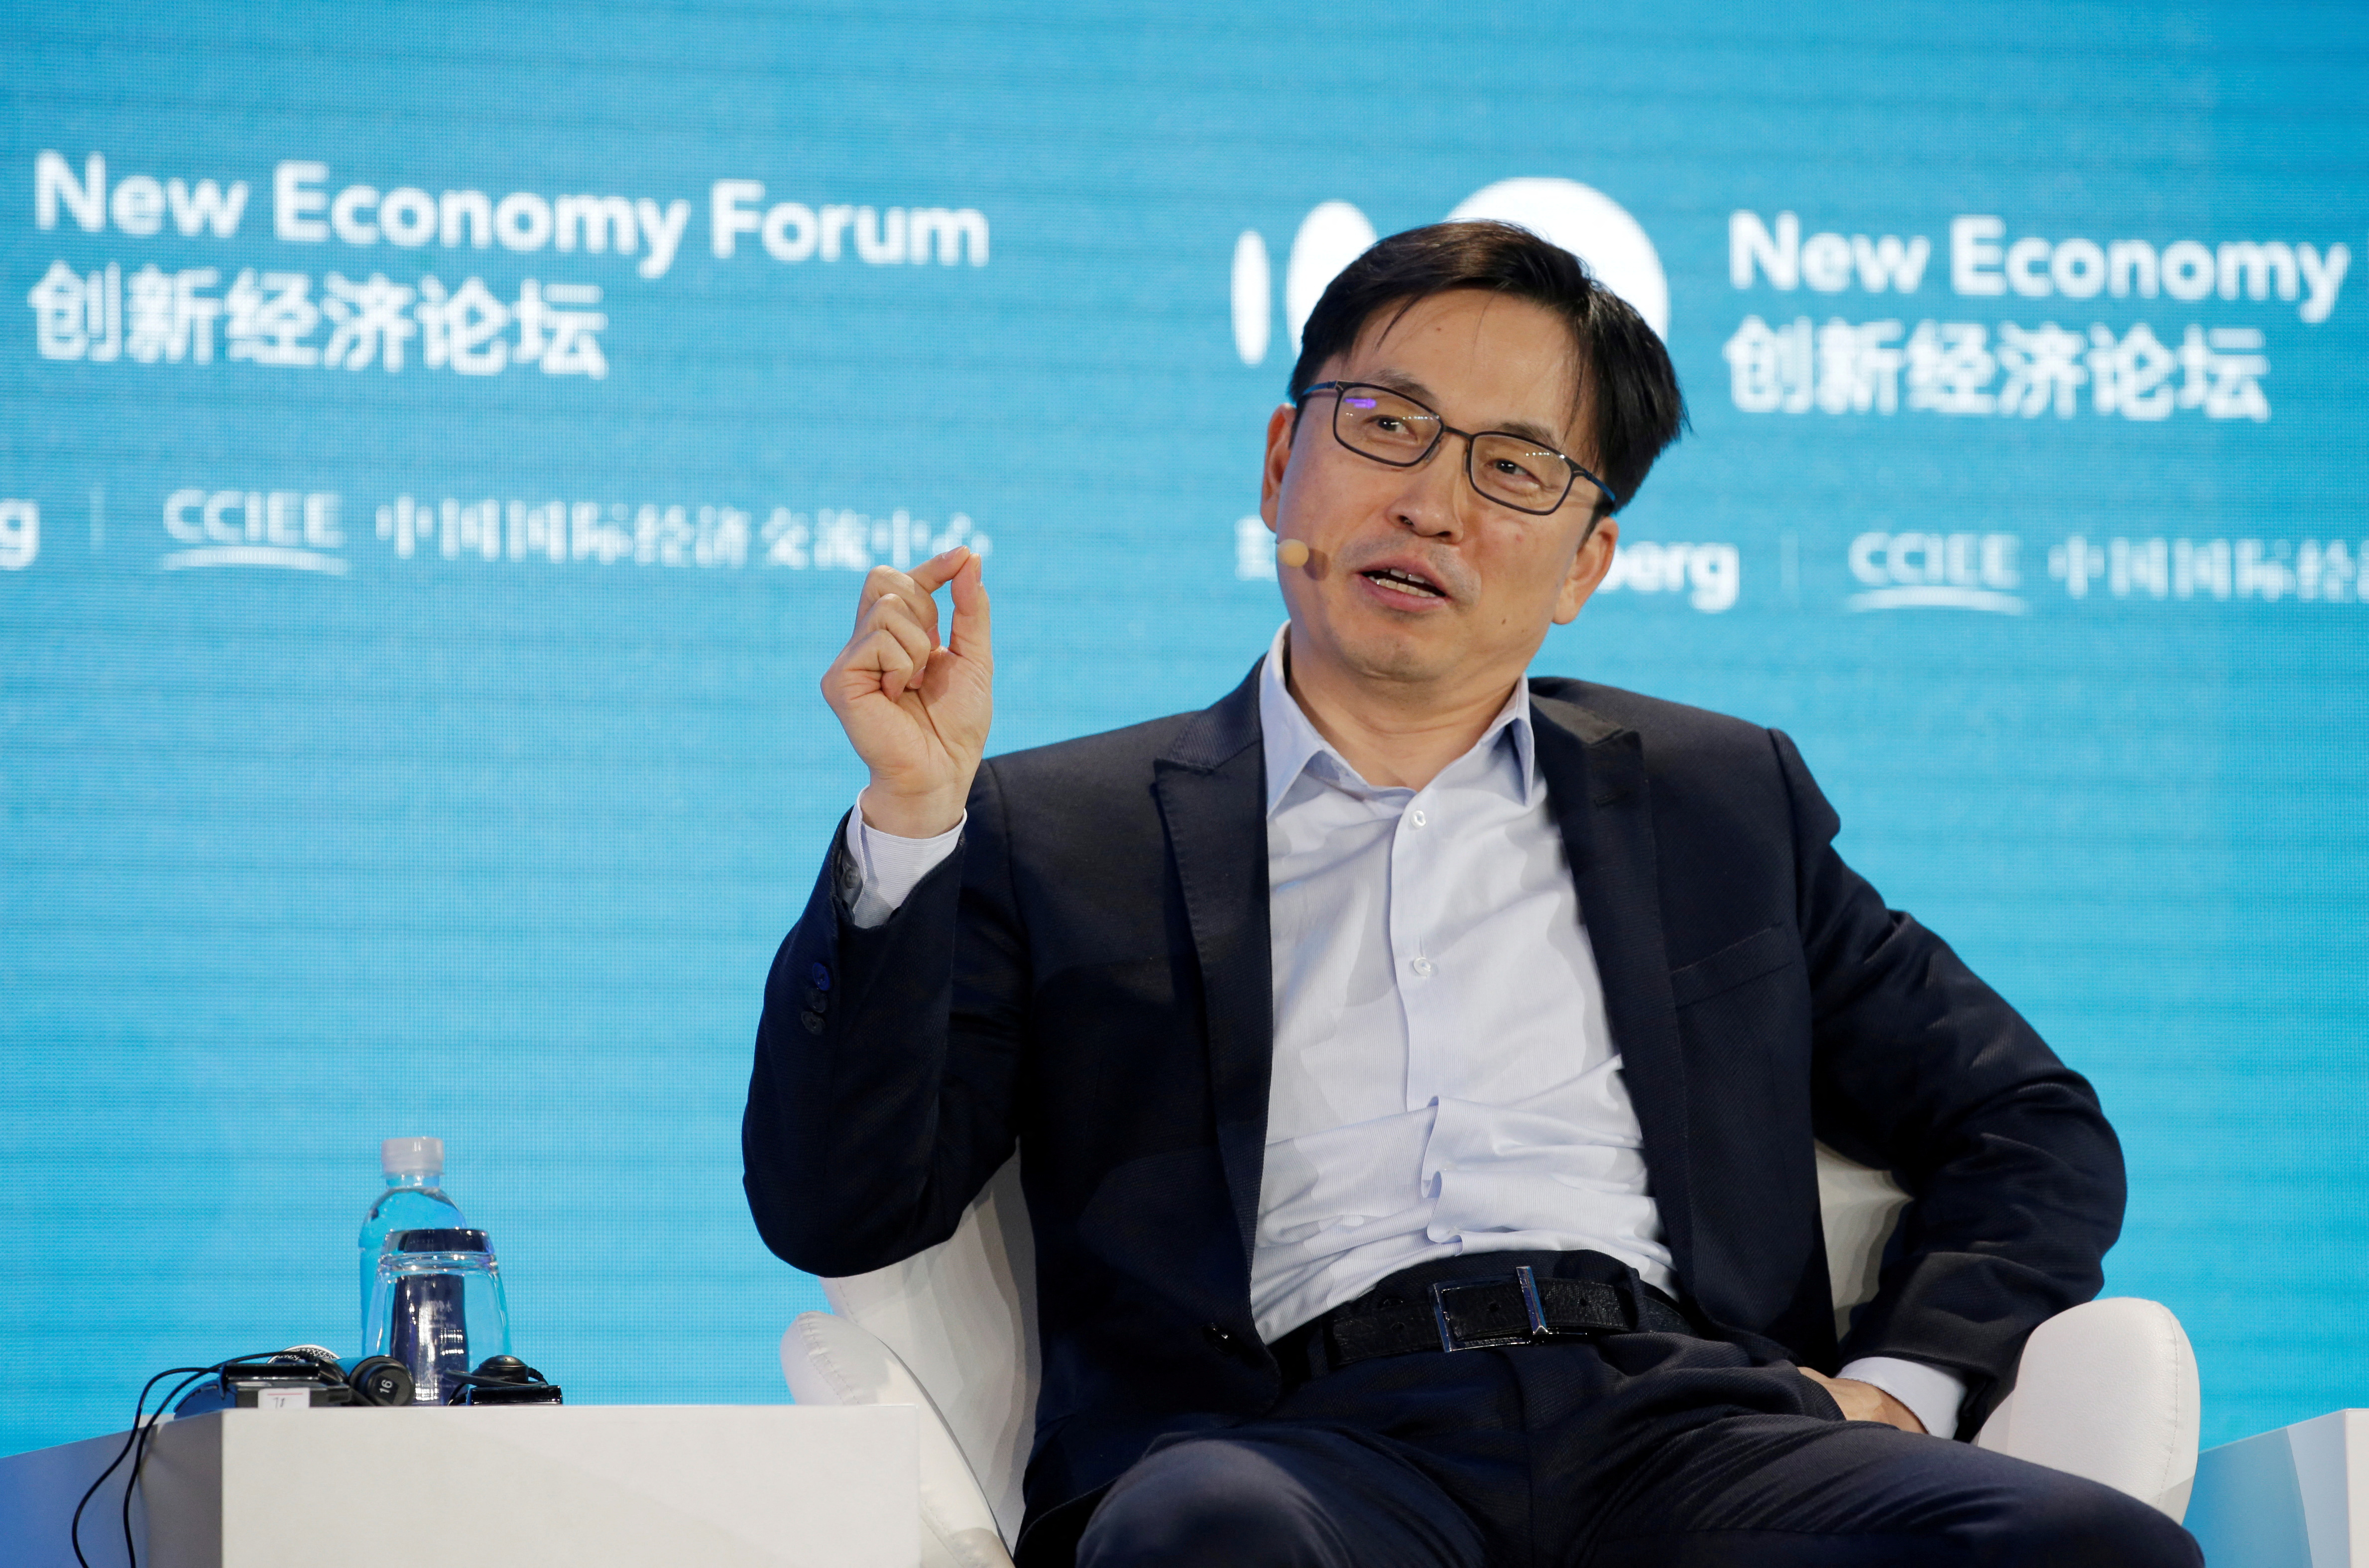 Zhang Lei, founder, chairman and chief executive officer of Hillhouse Capital Management Group, speaks at the 2019 New Economy Forum in Beijing